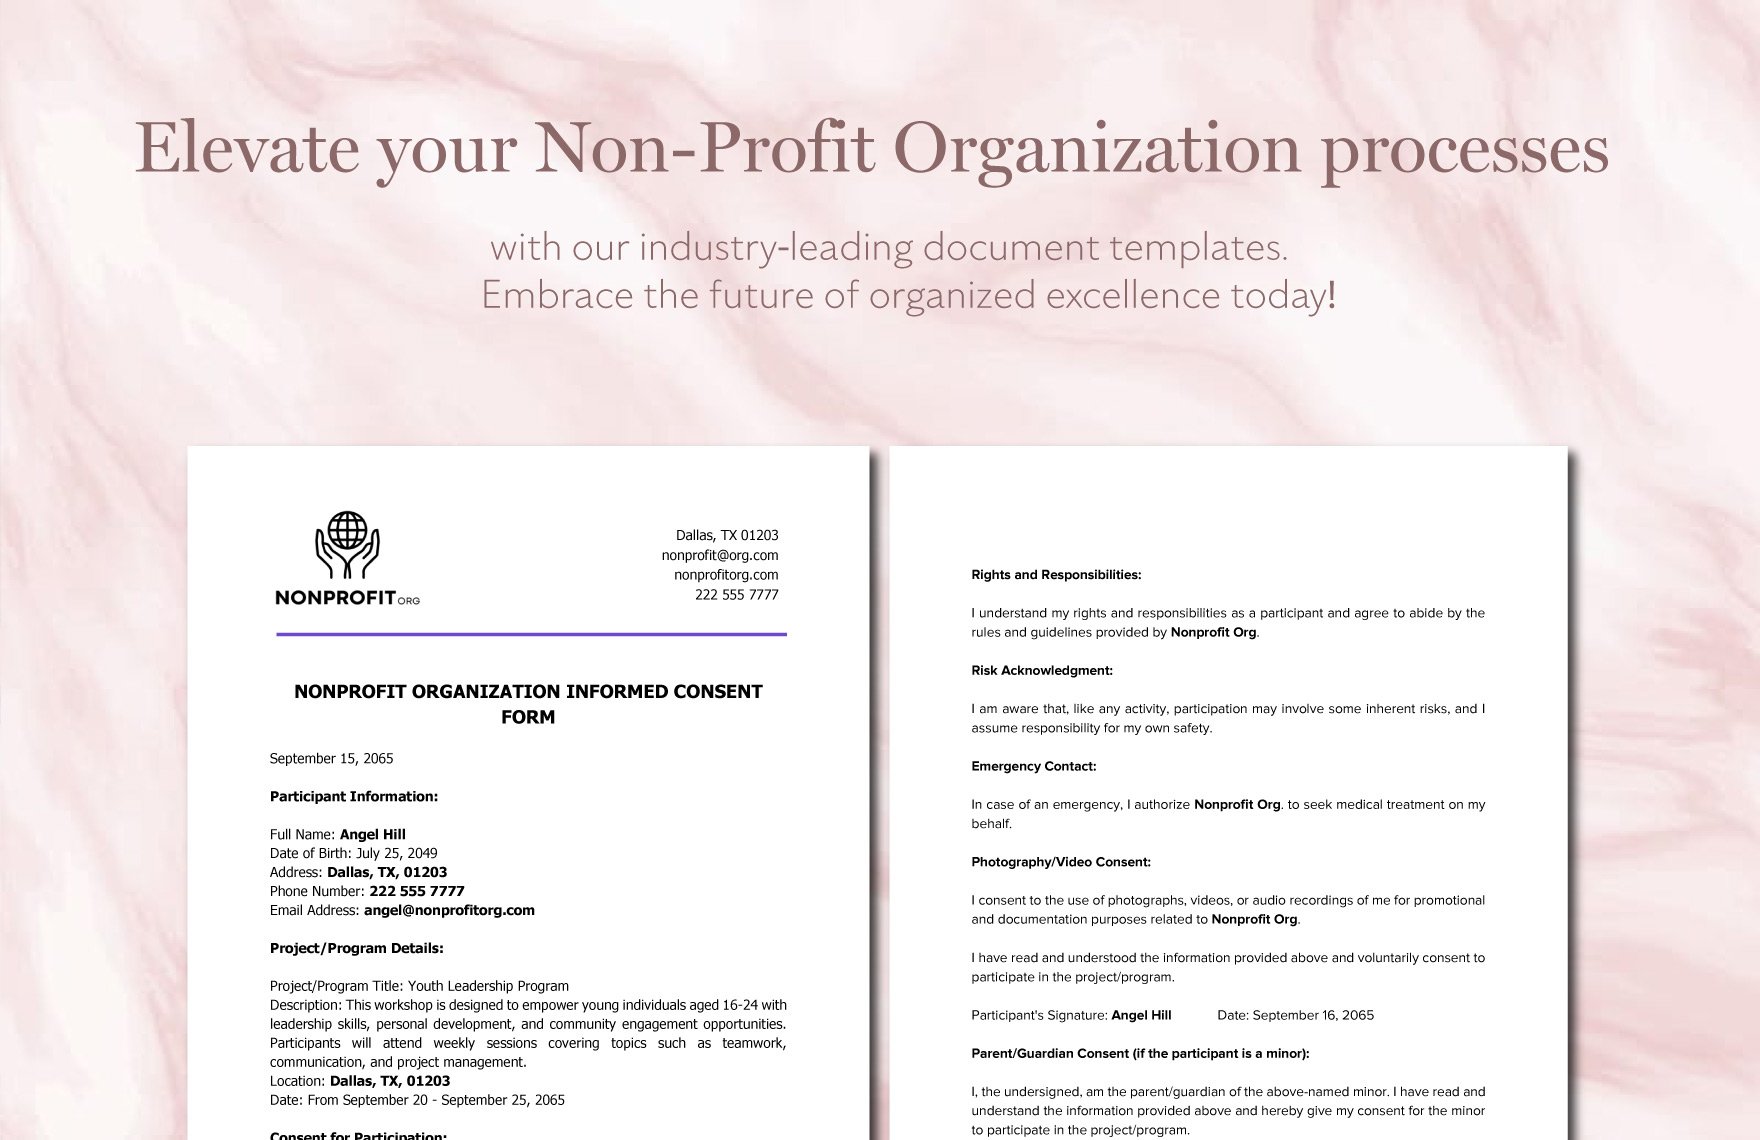 Nonprofit Organization Informed Consent Form Template